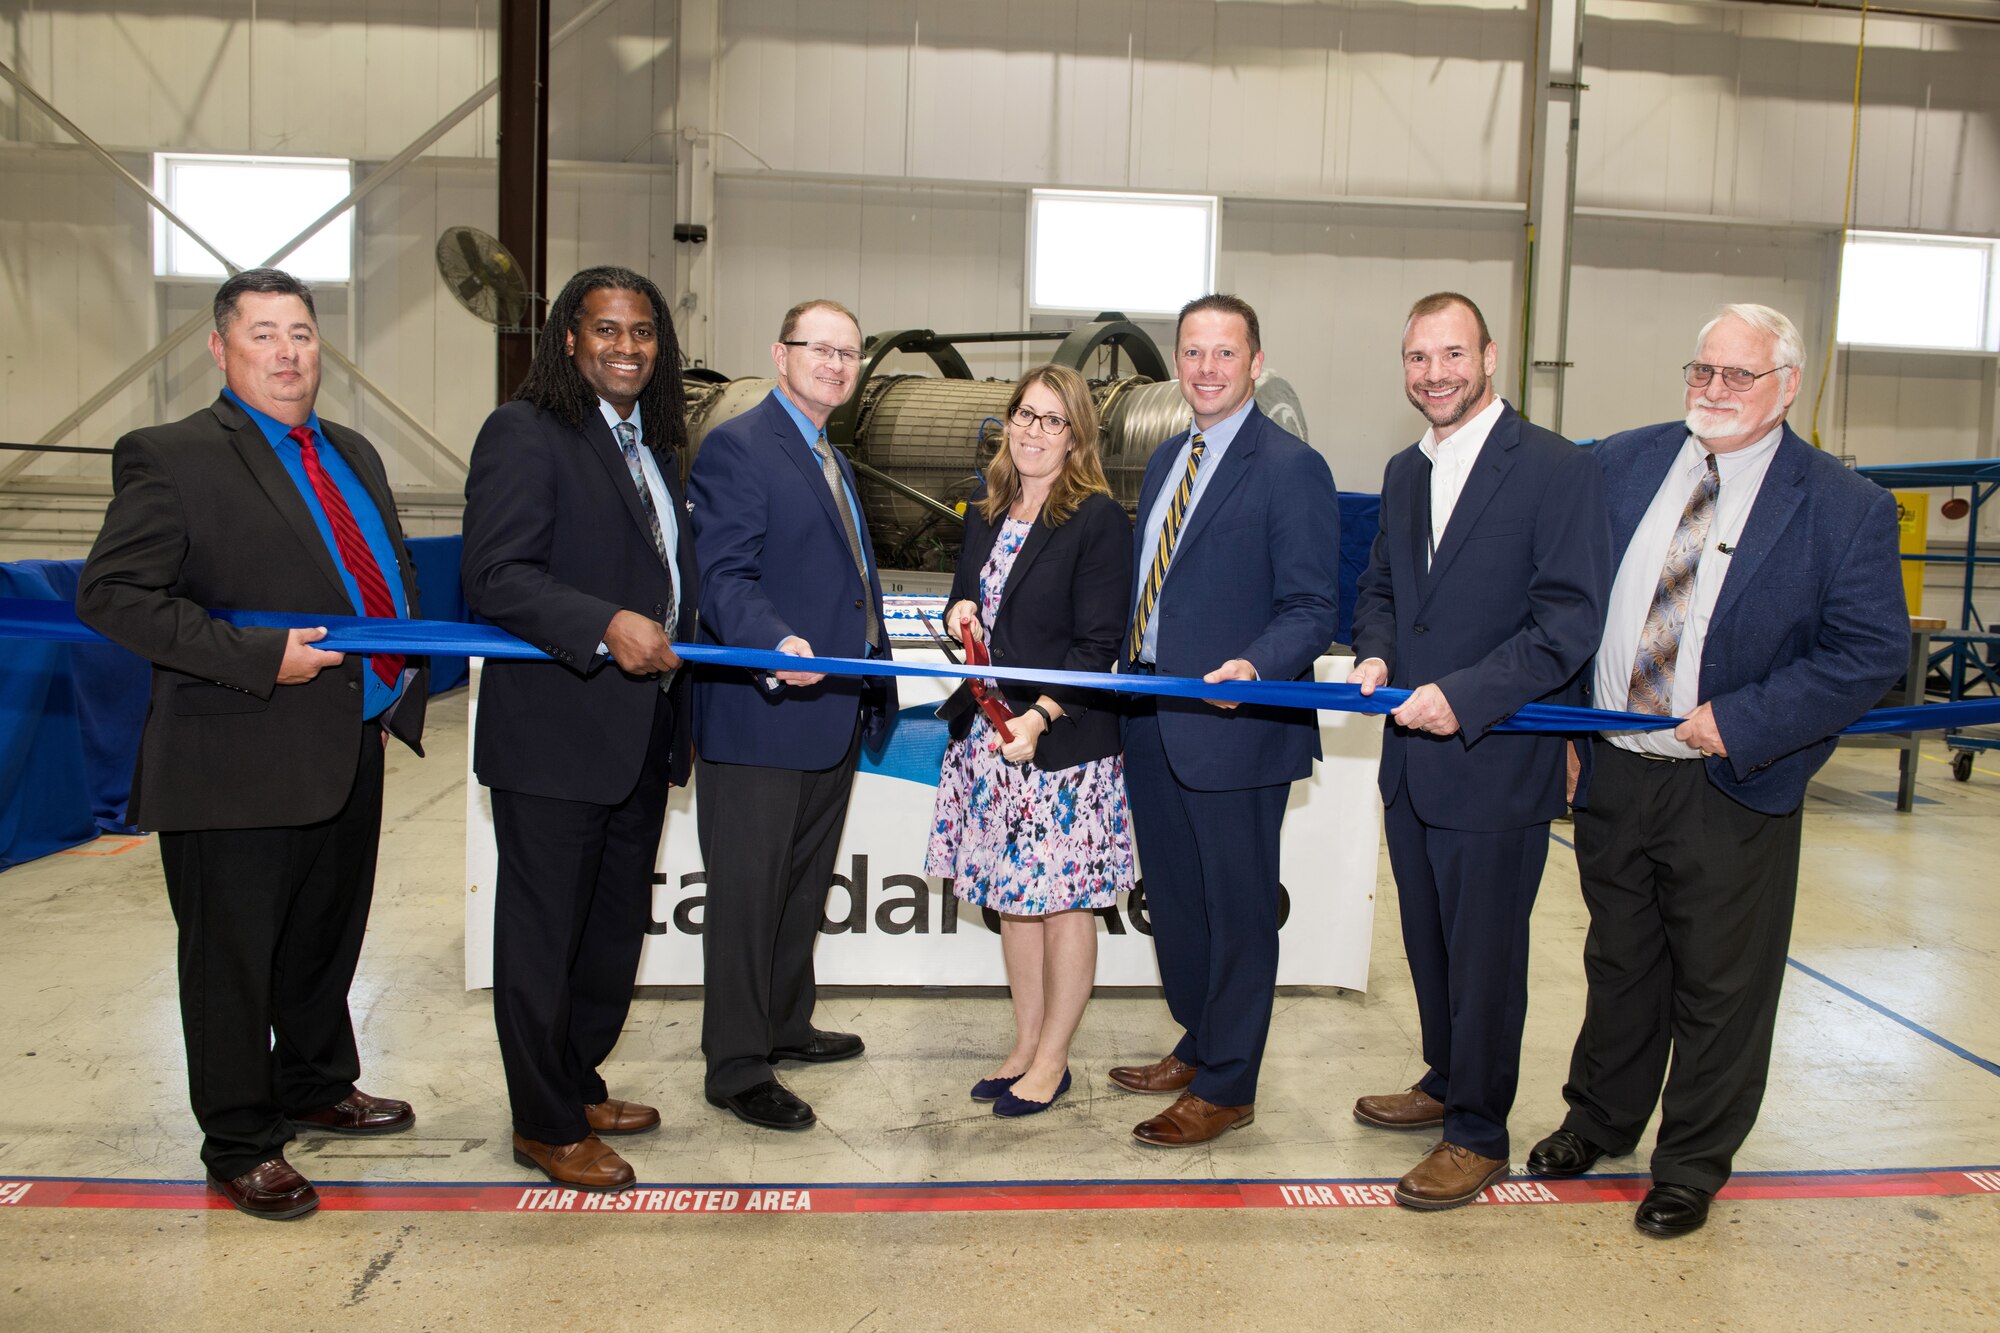 Senior leaders from the United States Air Force, General Electric- Aviation, StandardAero, Defense Logistic Agency-Aviation and Foreign Military Sales pose for a group photo during the ribbon-cutting ceremony held at the StandardAero facilities 25 July, 2019, at Kelly Field, Texas.